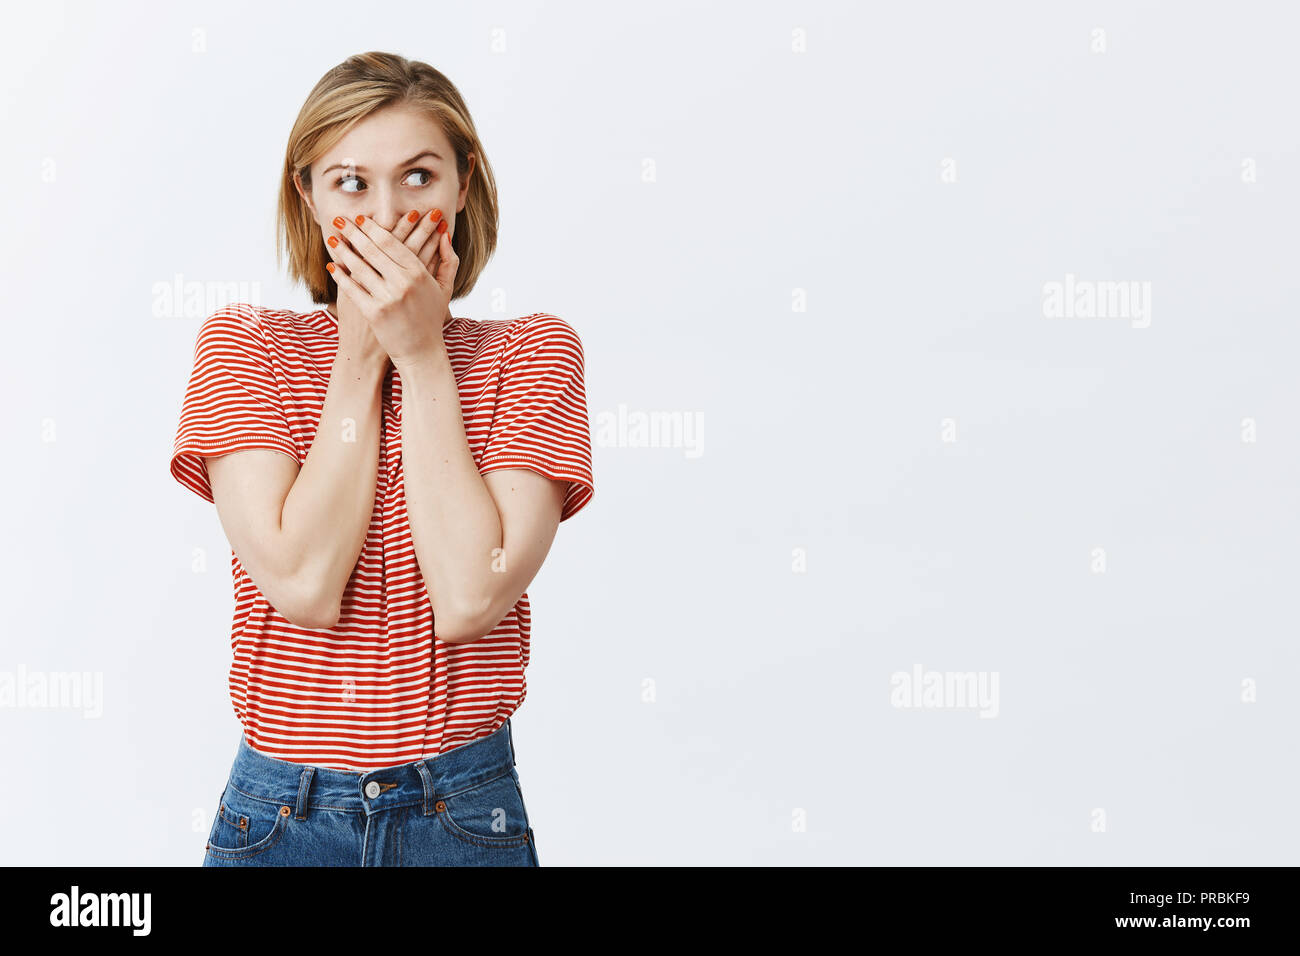 Girl witnessing embarrassing scene, losing speech, gasping, covering mouth with palms and staring anxiously right, being shocked and speechless, standing intense and scared over gray background Stock Photo